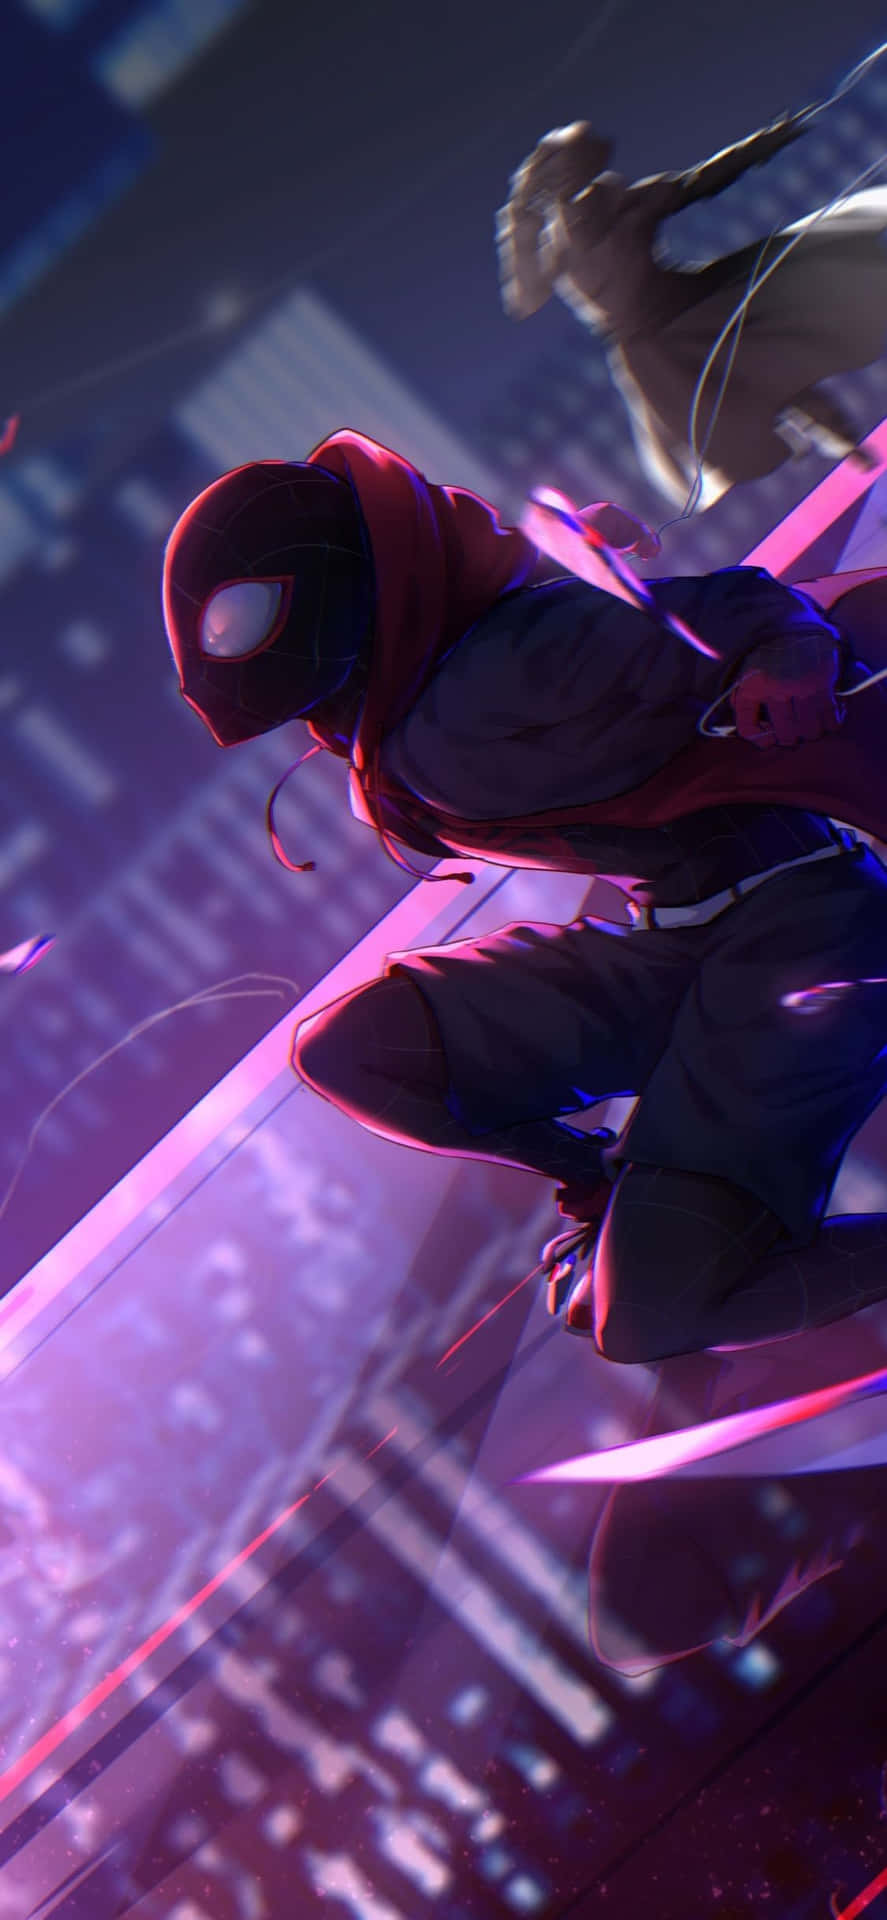 Lilla Neon Lys Spider Man Miles Morales iPhone Cover Wallpaper